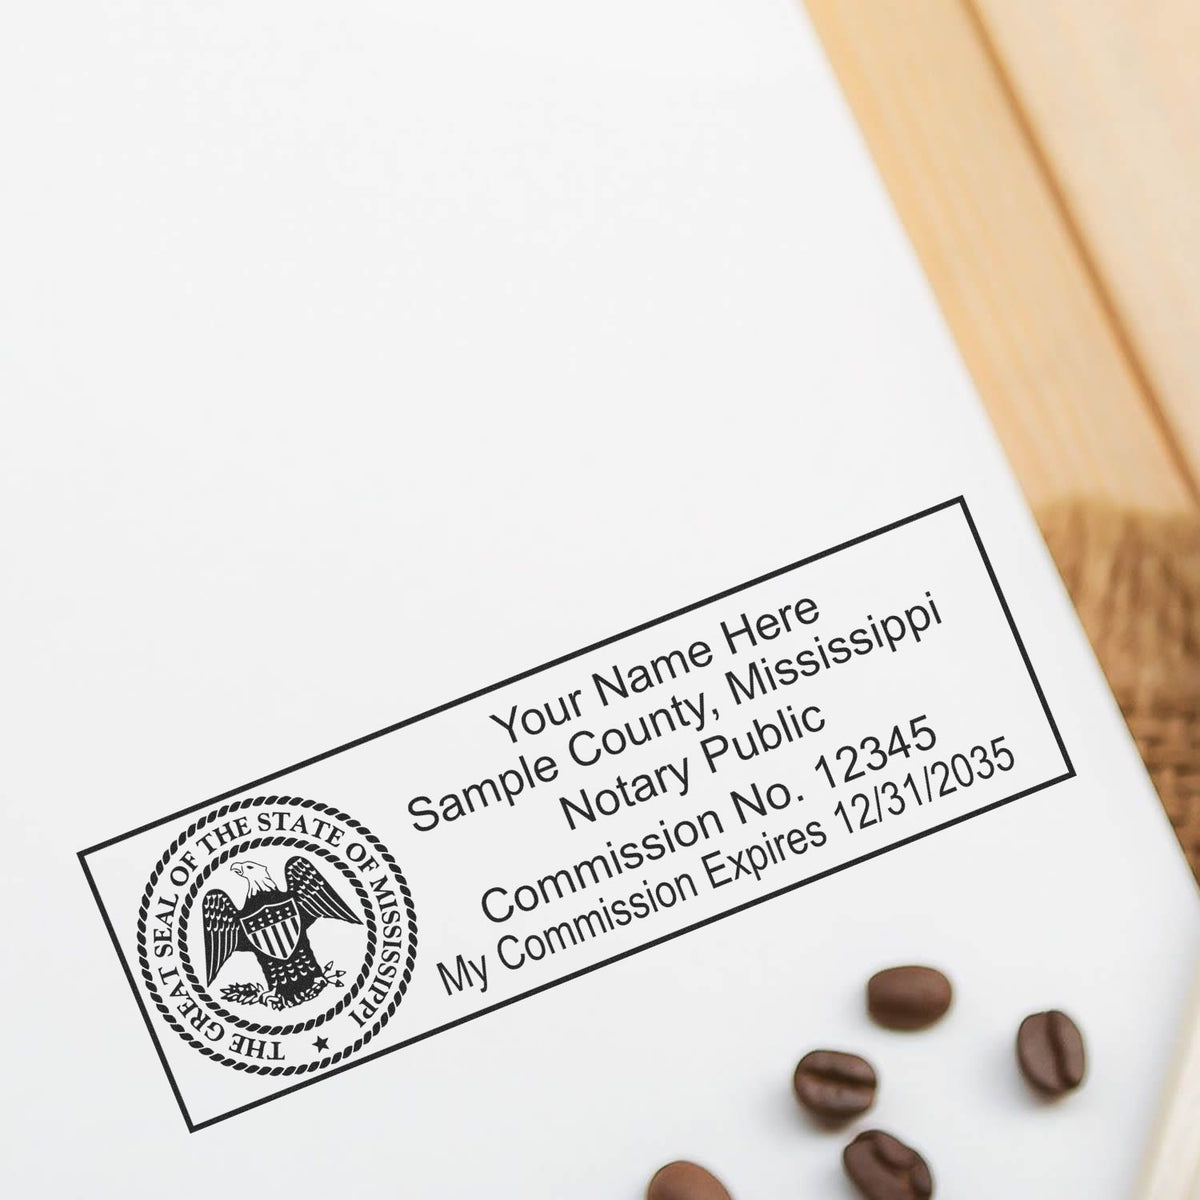 The Slim Pre-Inked State Seal Notary Stamp for Mississippi stamp impression comes to life with a crisp, detailed photo on paper - showcasing true professional quality.